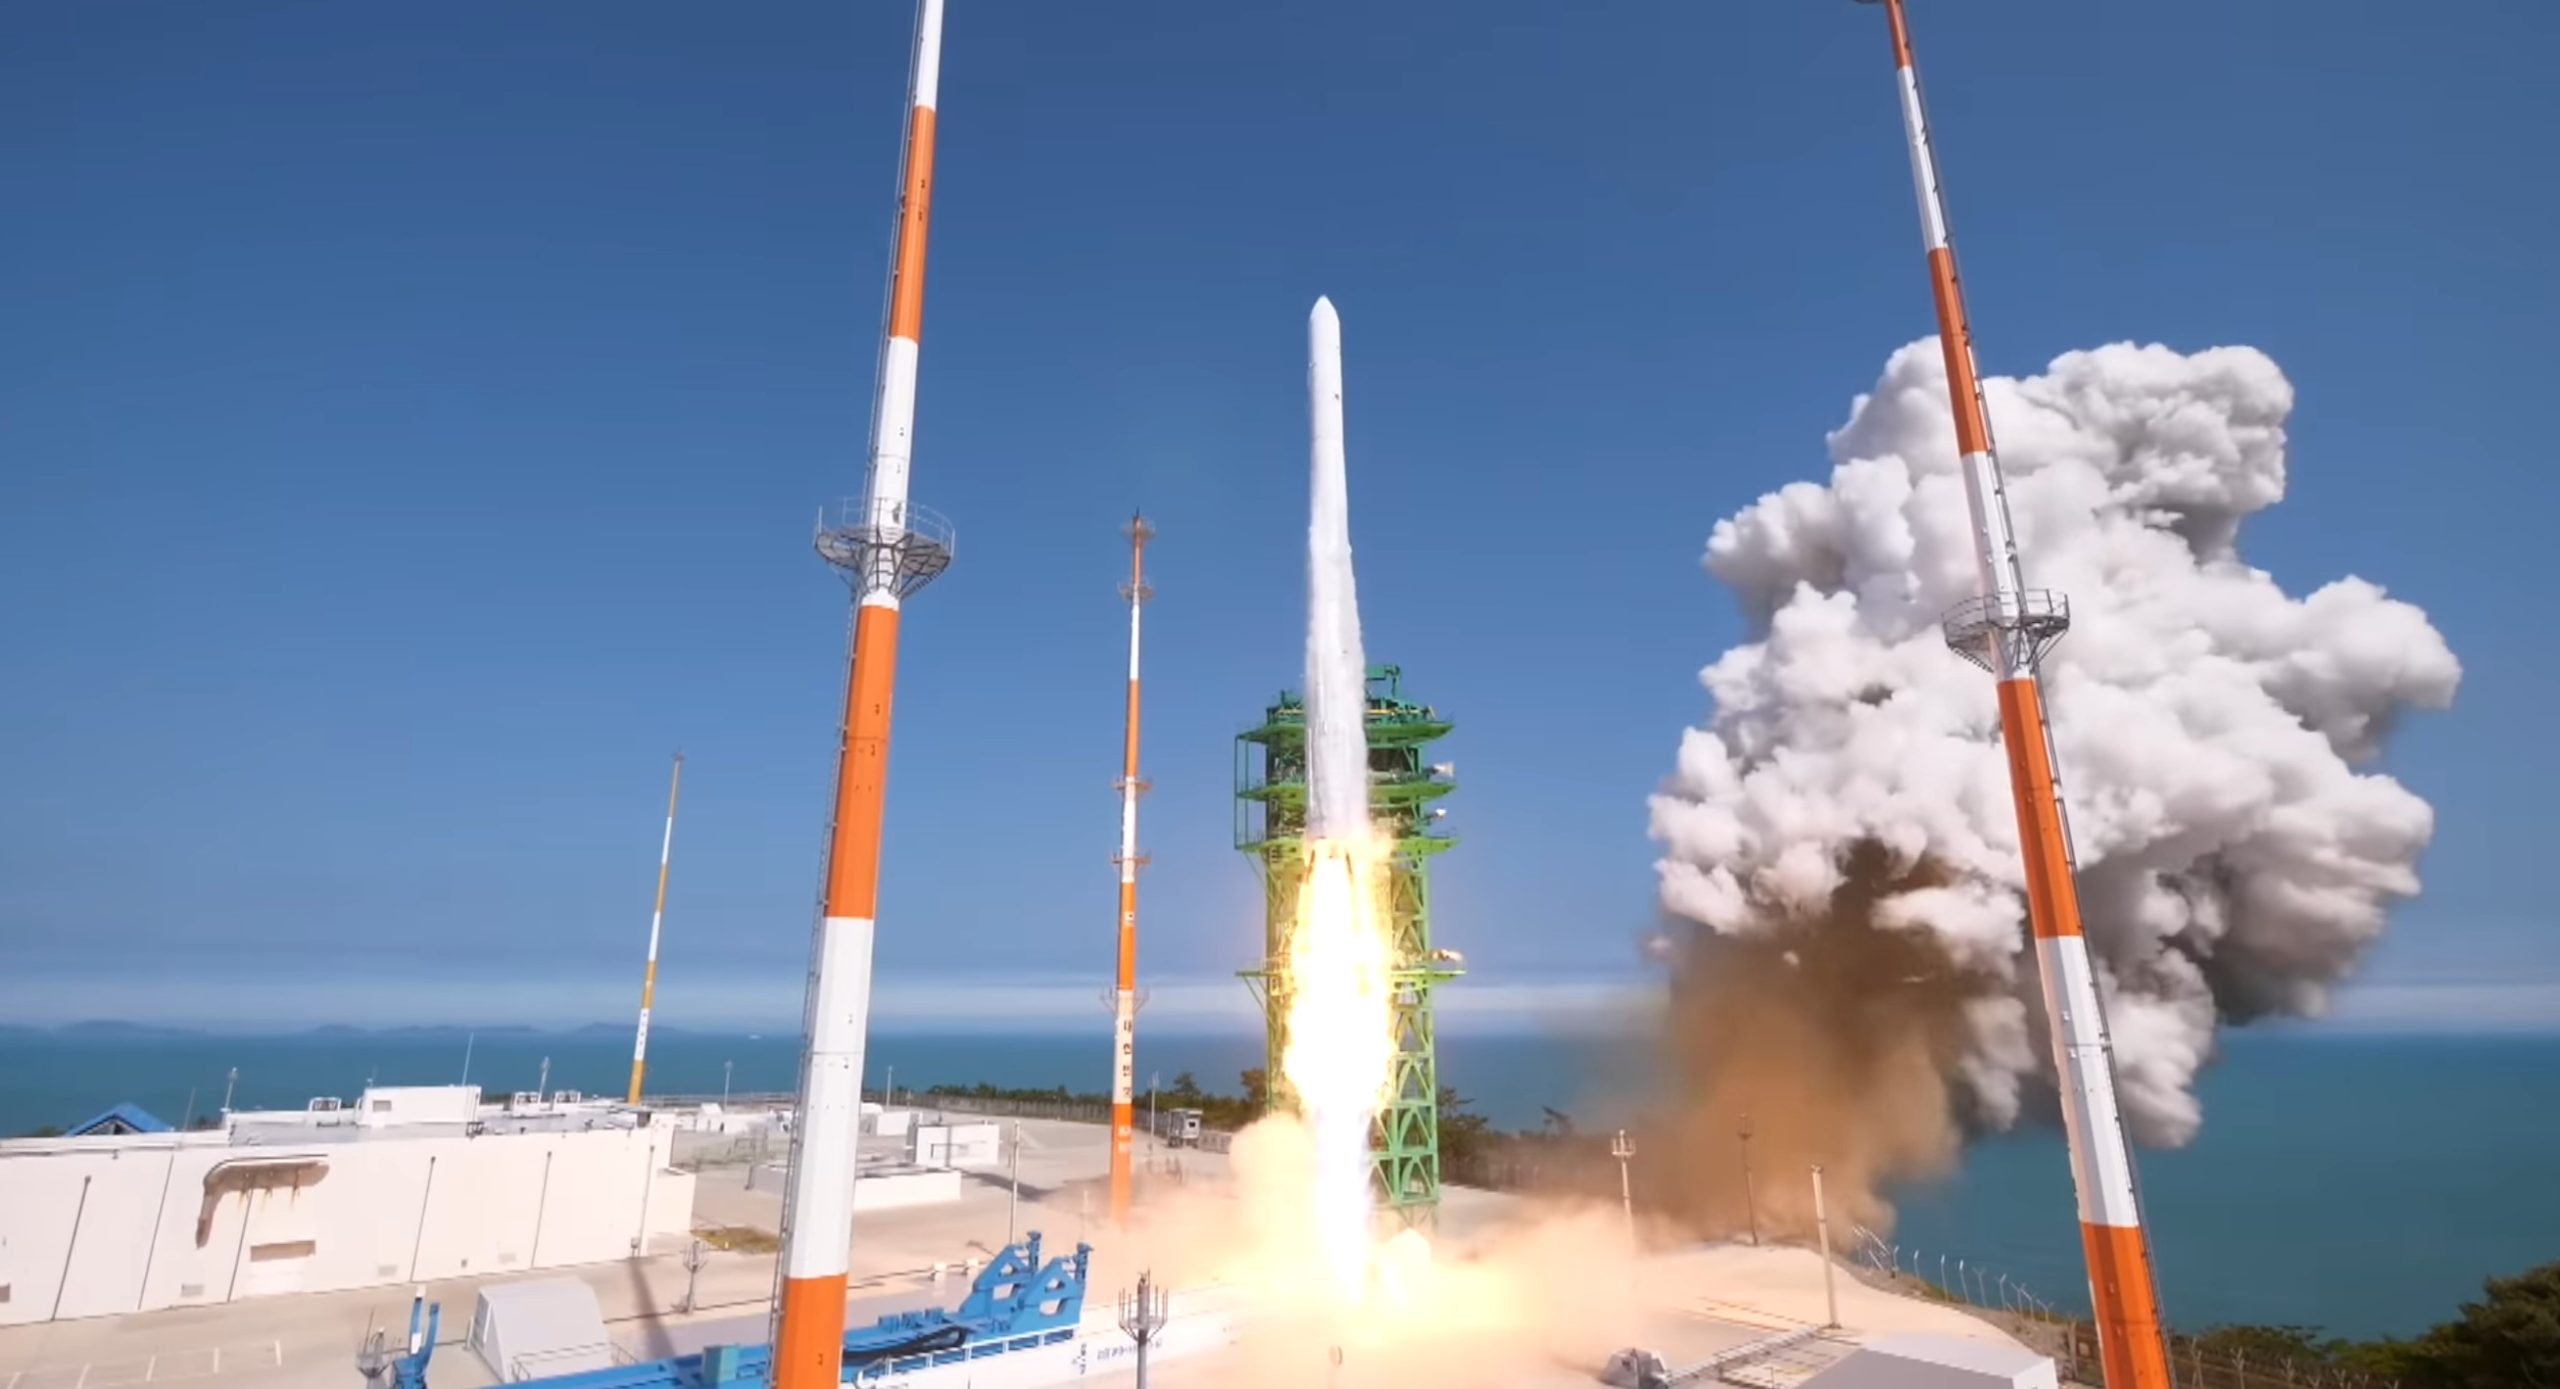 The Nuri rocket, developed and manufactured in South Korea, was successfully launched into space and is a great advance for the galactic industry of the Asian country